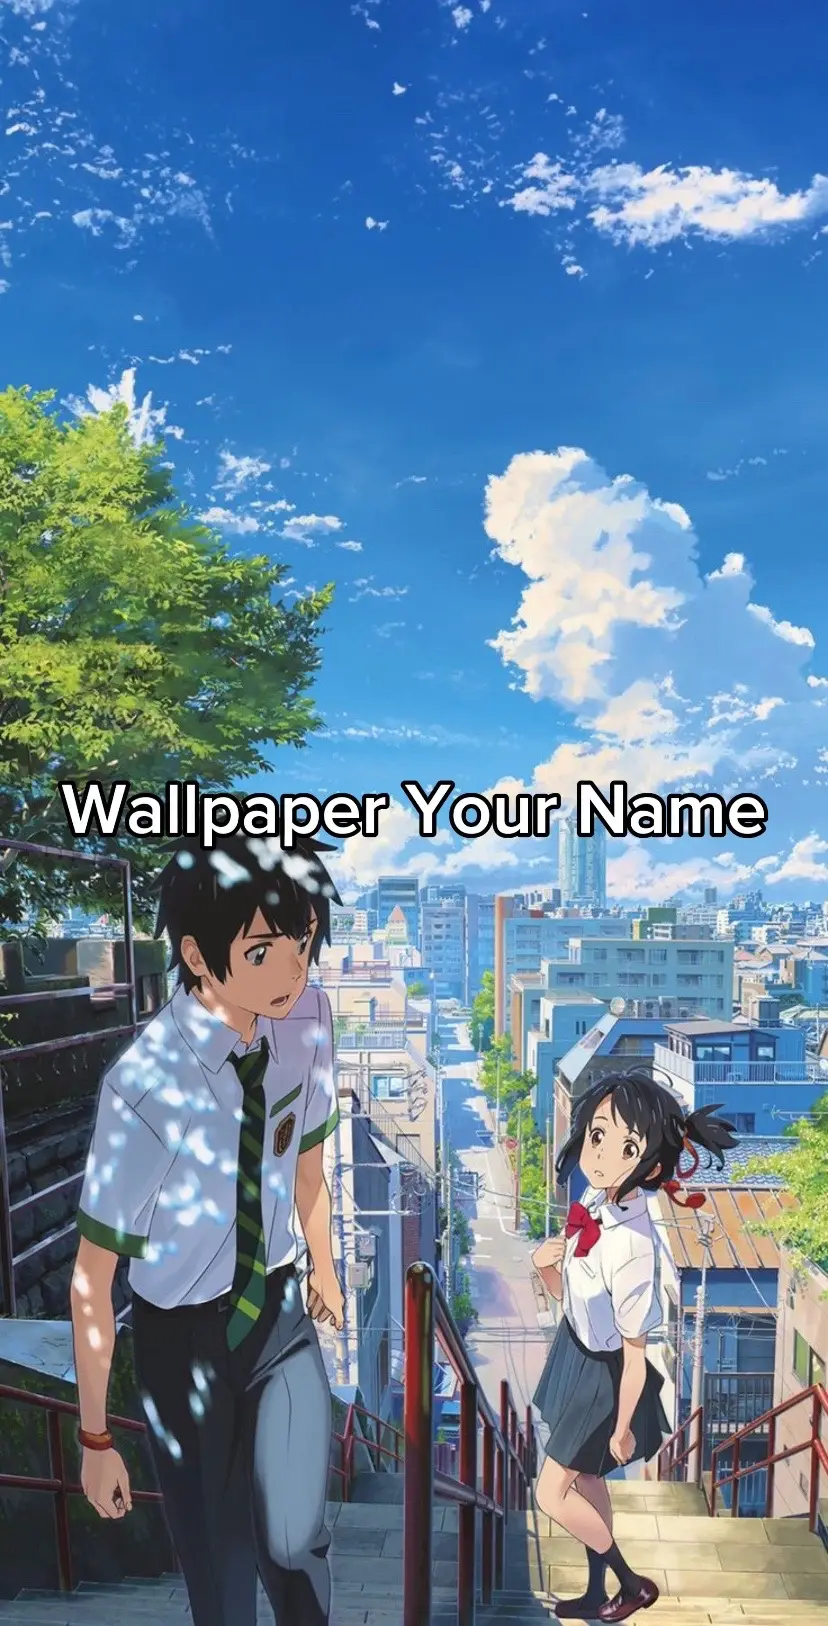 #yourname #wallpaper #wallpapers #foryou #fyp #pourtoi 